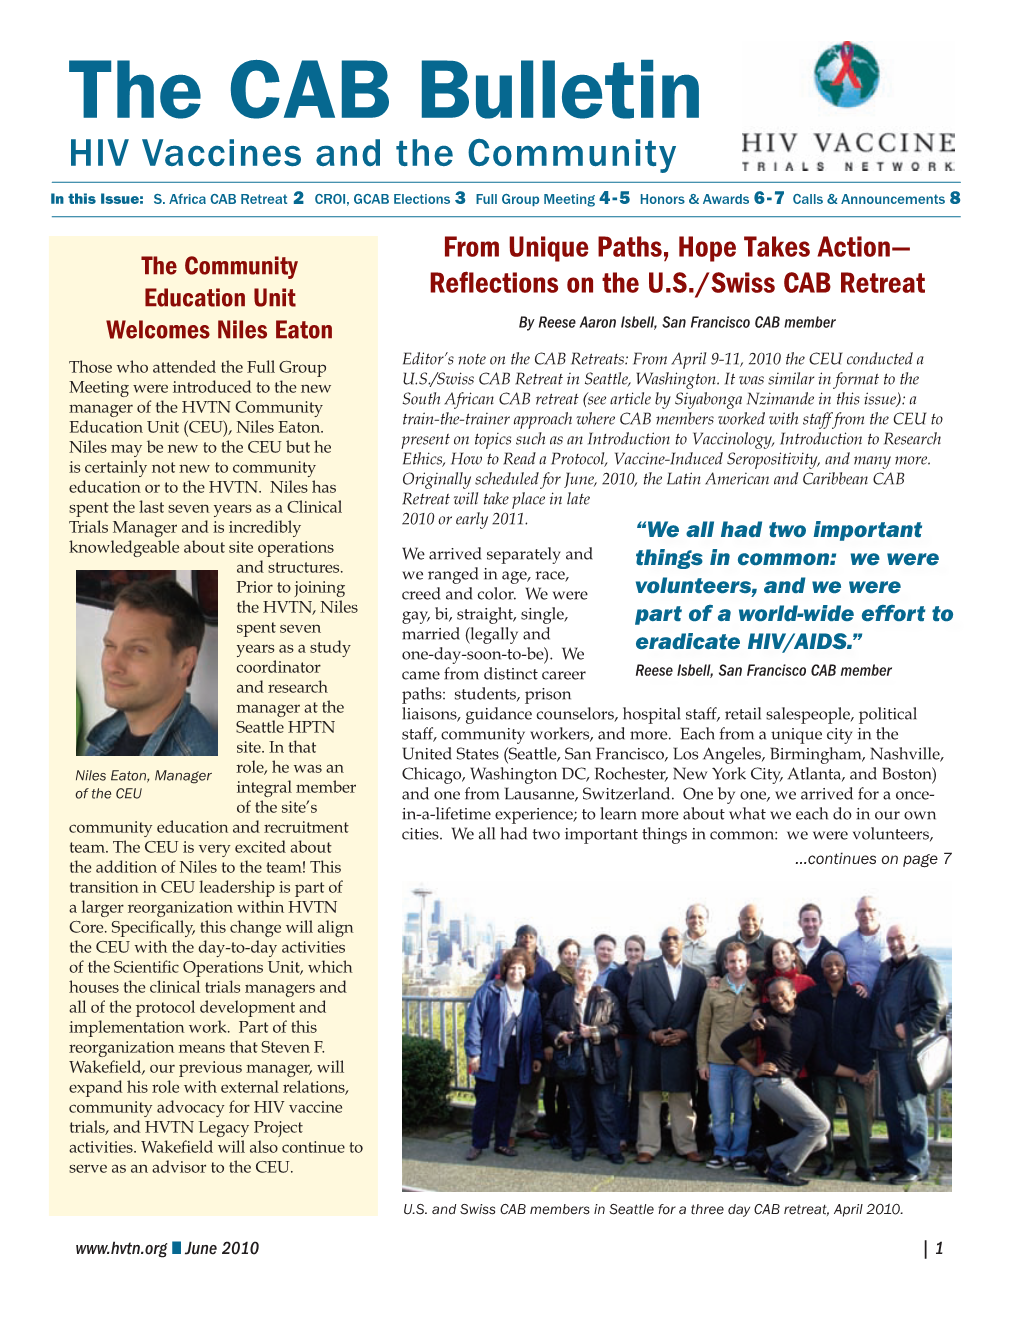 The CAB Bulletin HIV Vaccines and the Community in This Issue: S